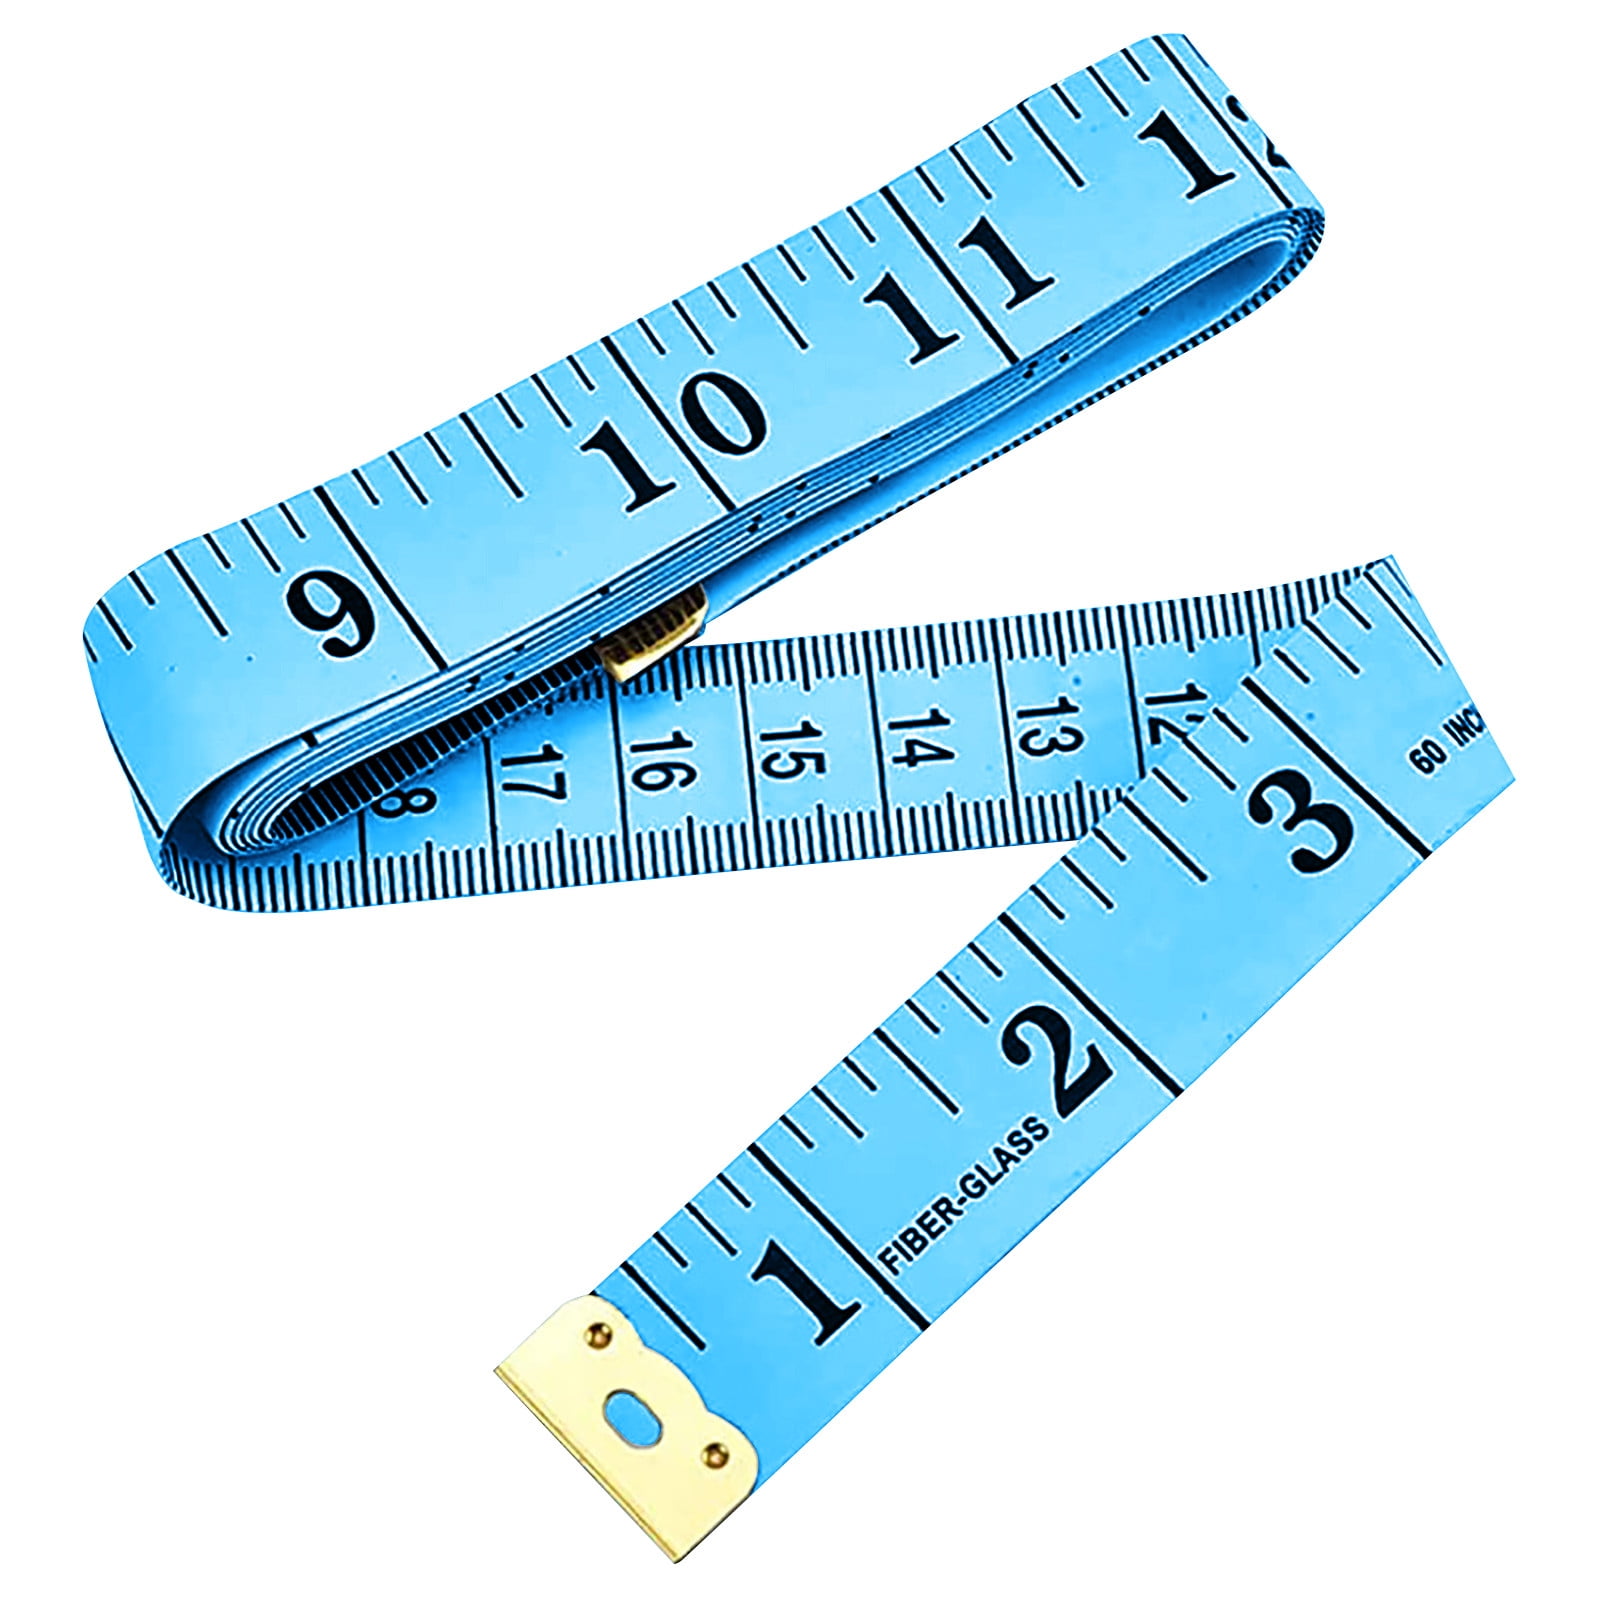 60-Inch/150-cm Soft Black & Retractable Blue Tape Measure Body Measuring Tape Set Dual Sided 4 Pack Tape Measure Measuring Tape for Body Fabric Sewing Tailor Cloth Knitting Home Craft Measurements